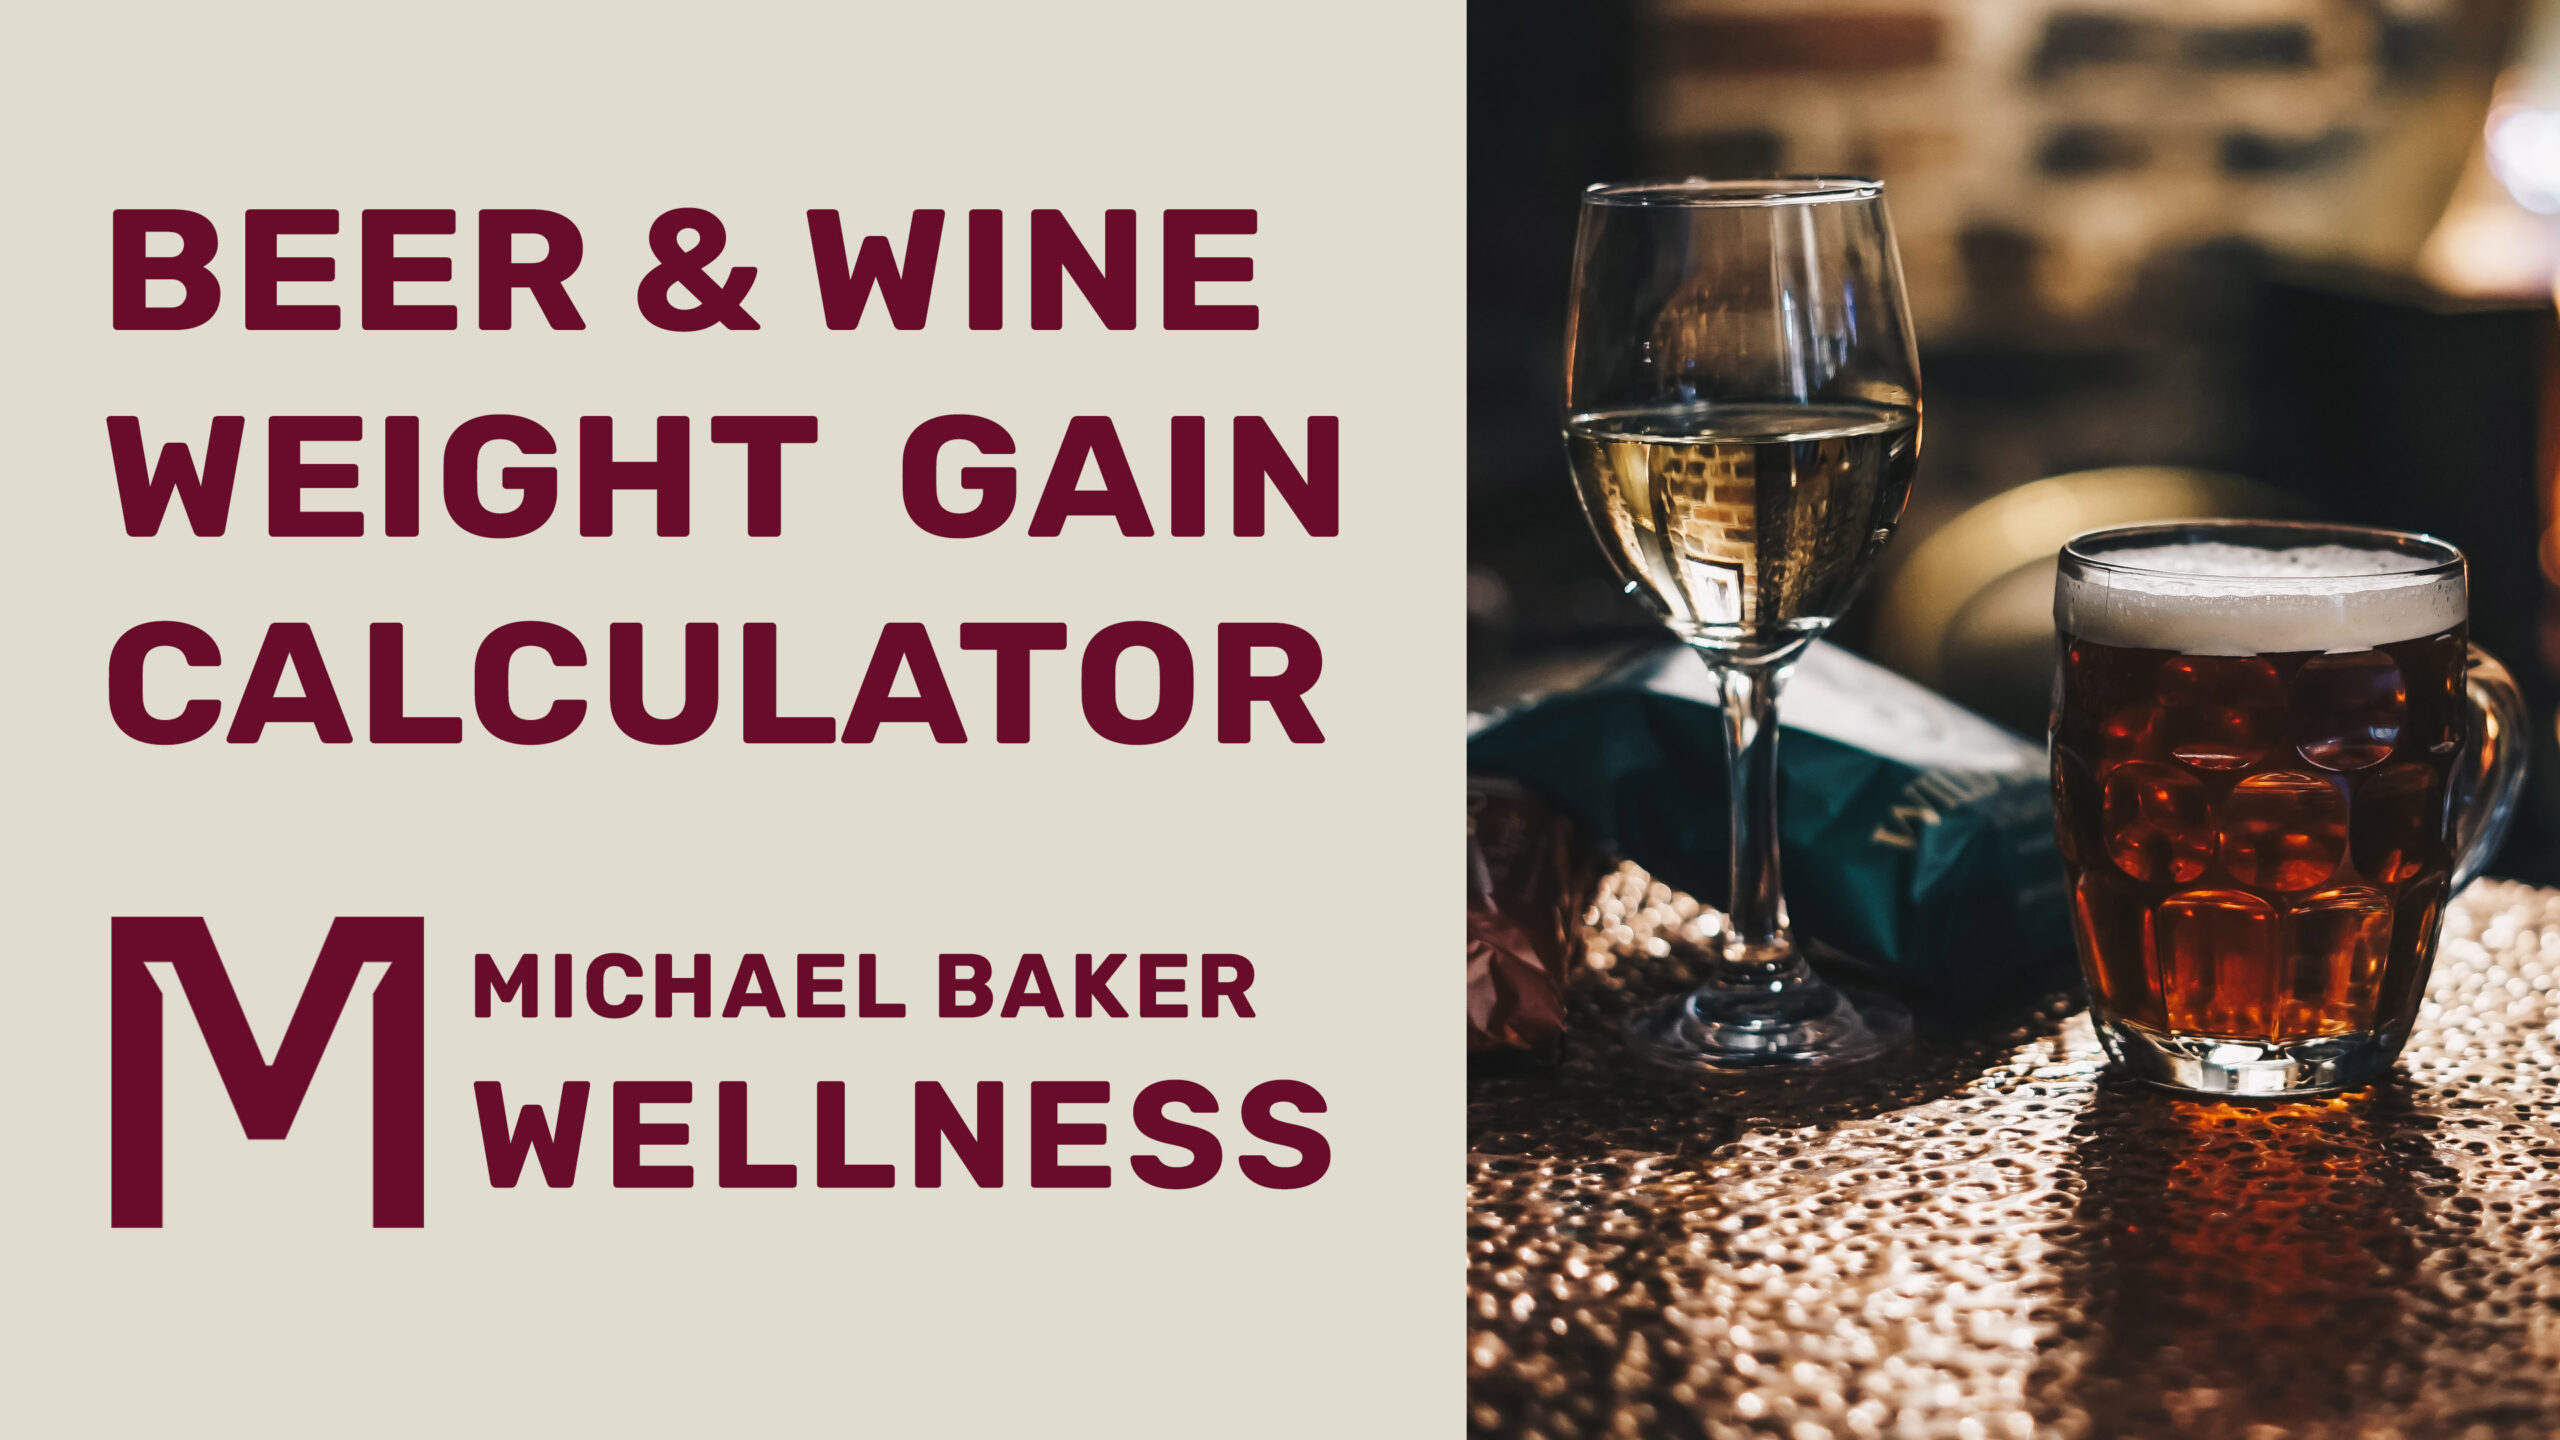 Featured image for “Beer & Wine Weight Gain Calculator”